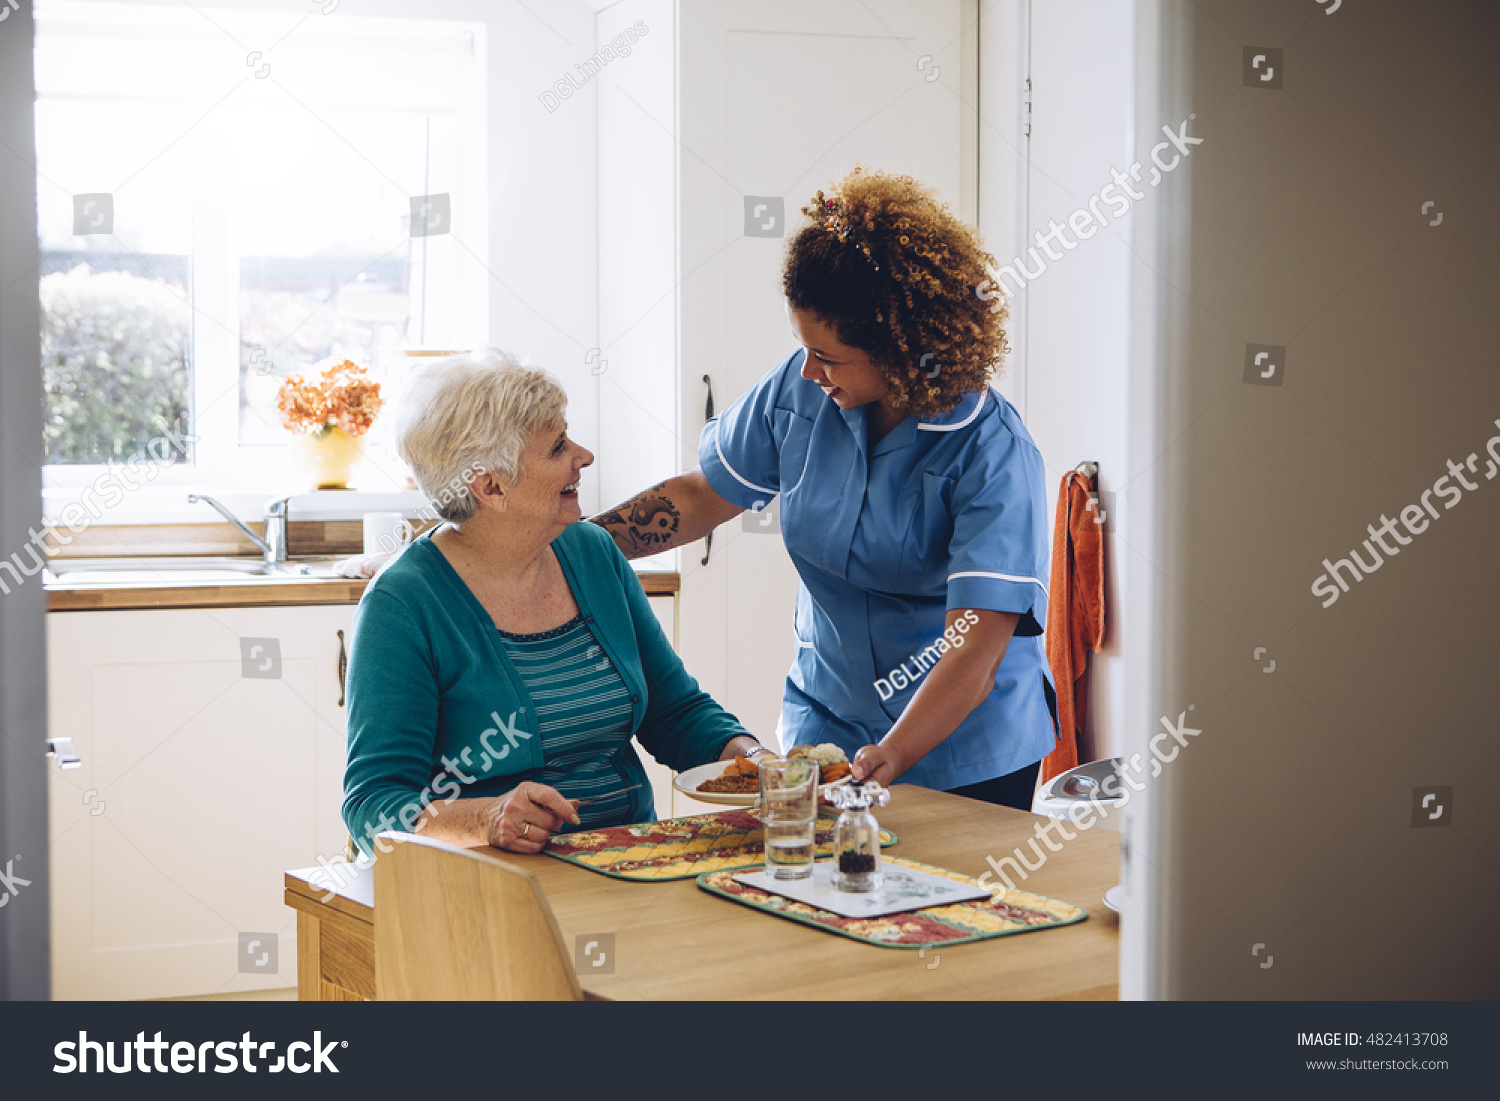 Care worker giving an old lady her dinner in her home.  #482413708